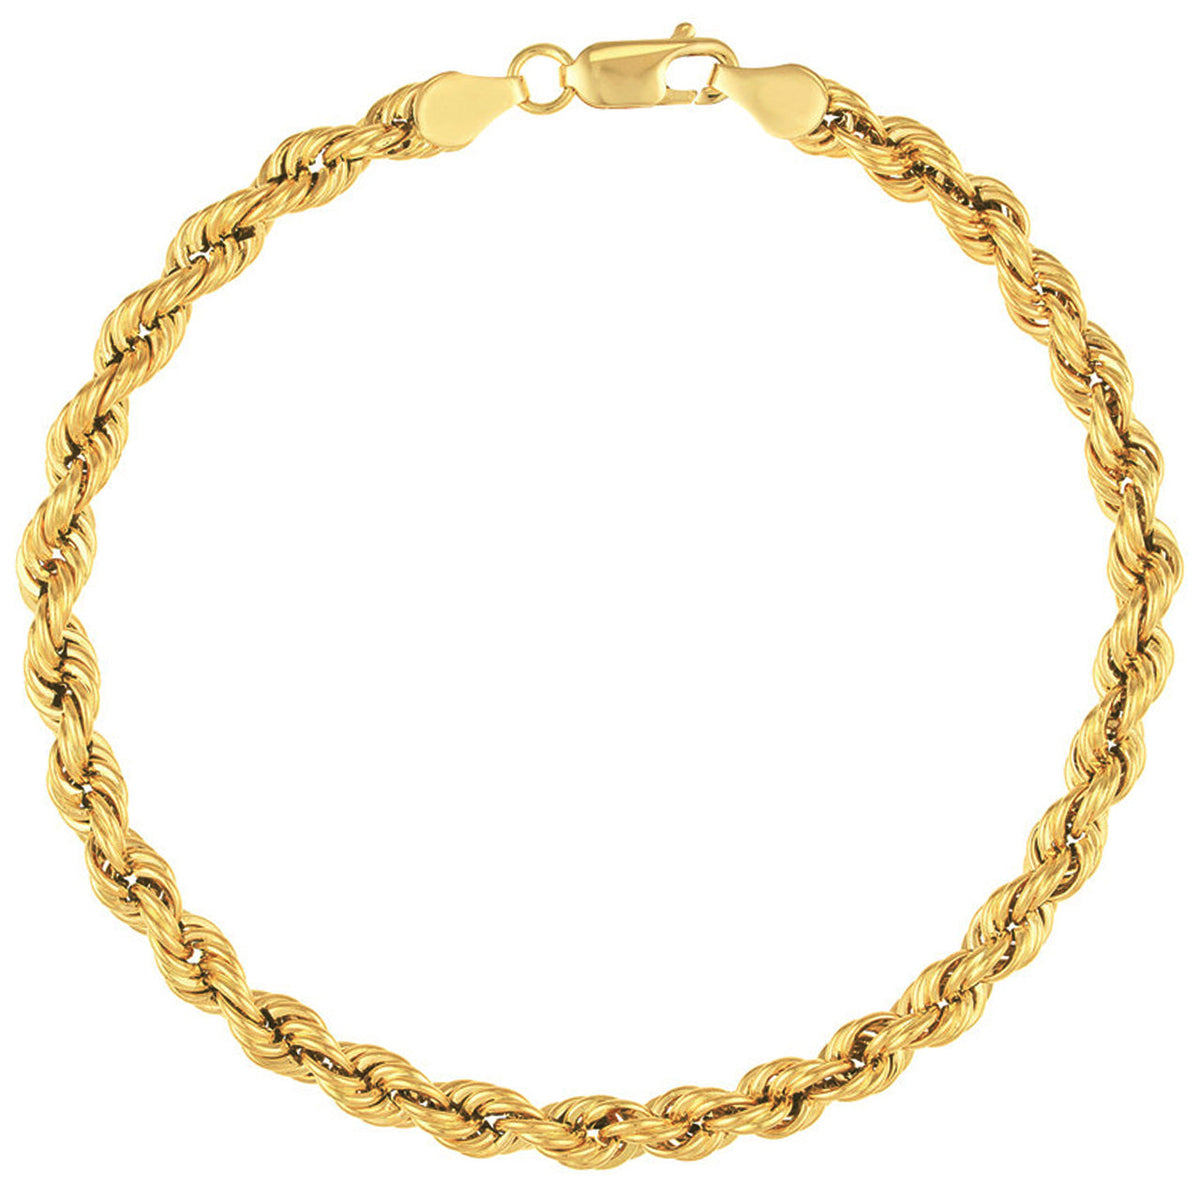 14k Yellow Gold Hollow 6mm Rope Chain Bracelet with Lobster Lock - Light Rope Chain Bracelet with Diamond Cut